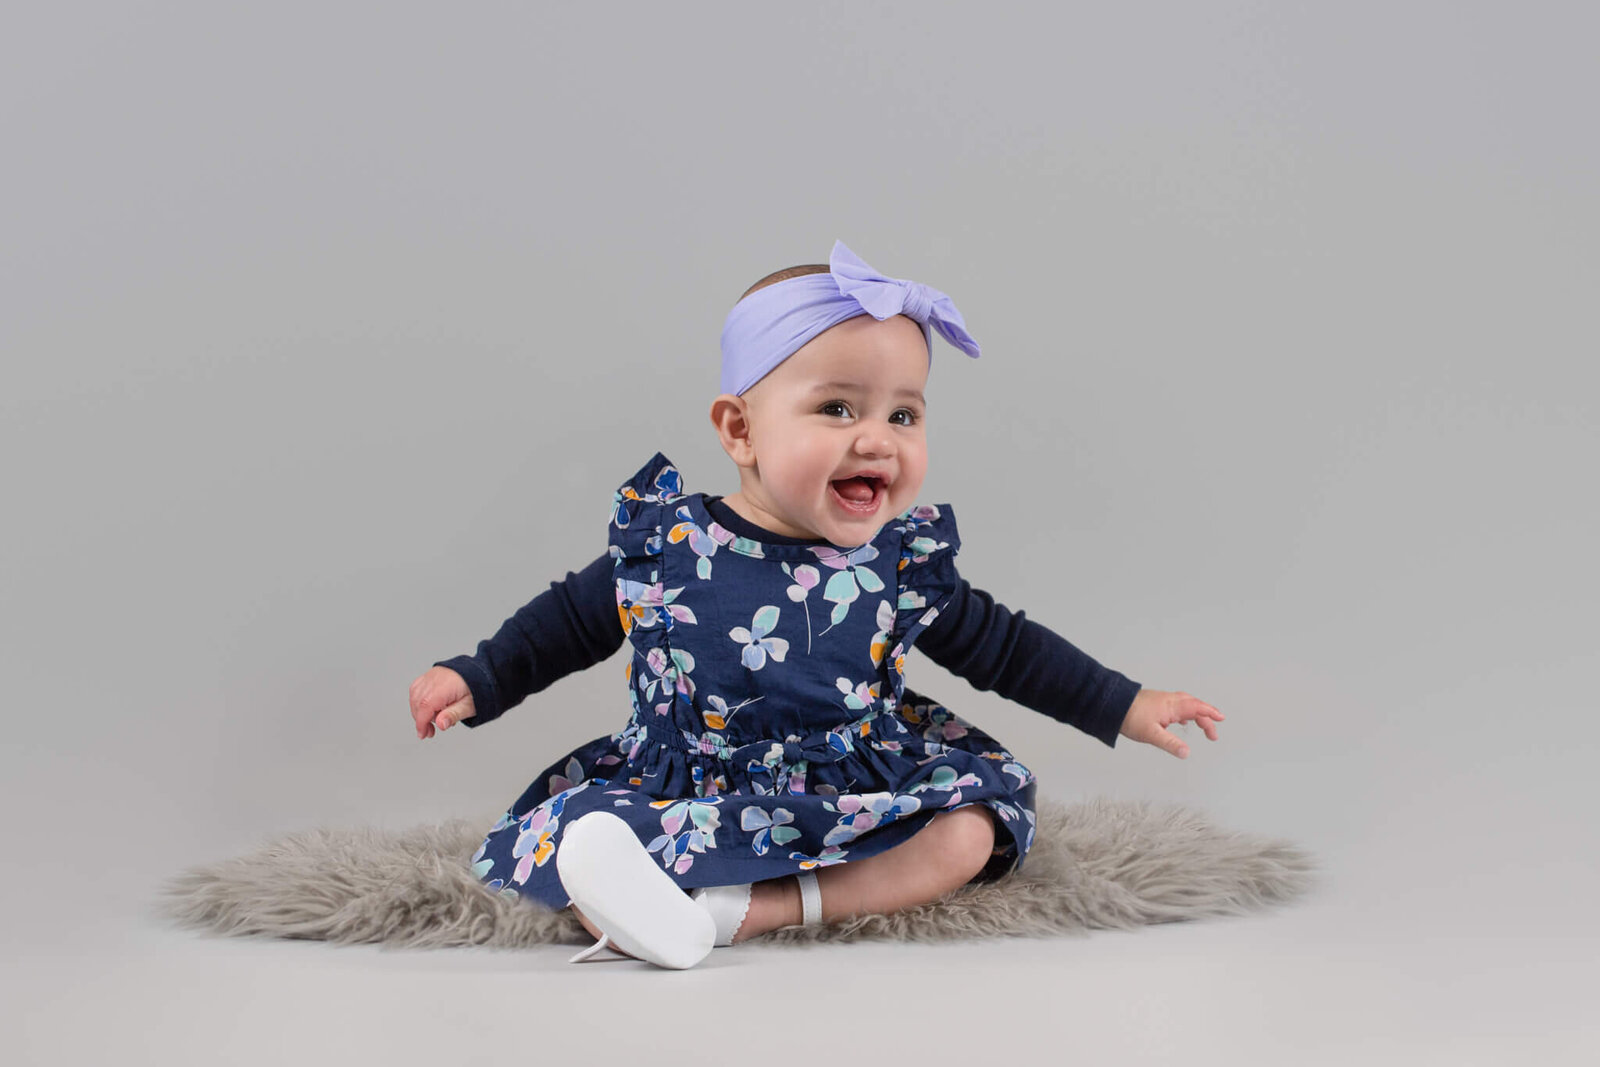 Six month sitter session of baby girl in floral navy dress smiling at camera in studio on gray background